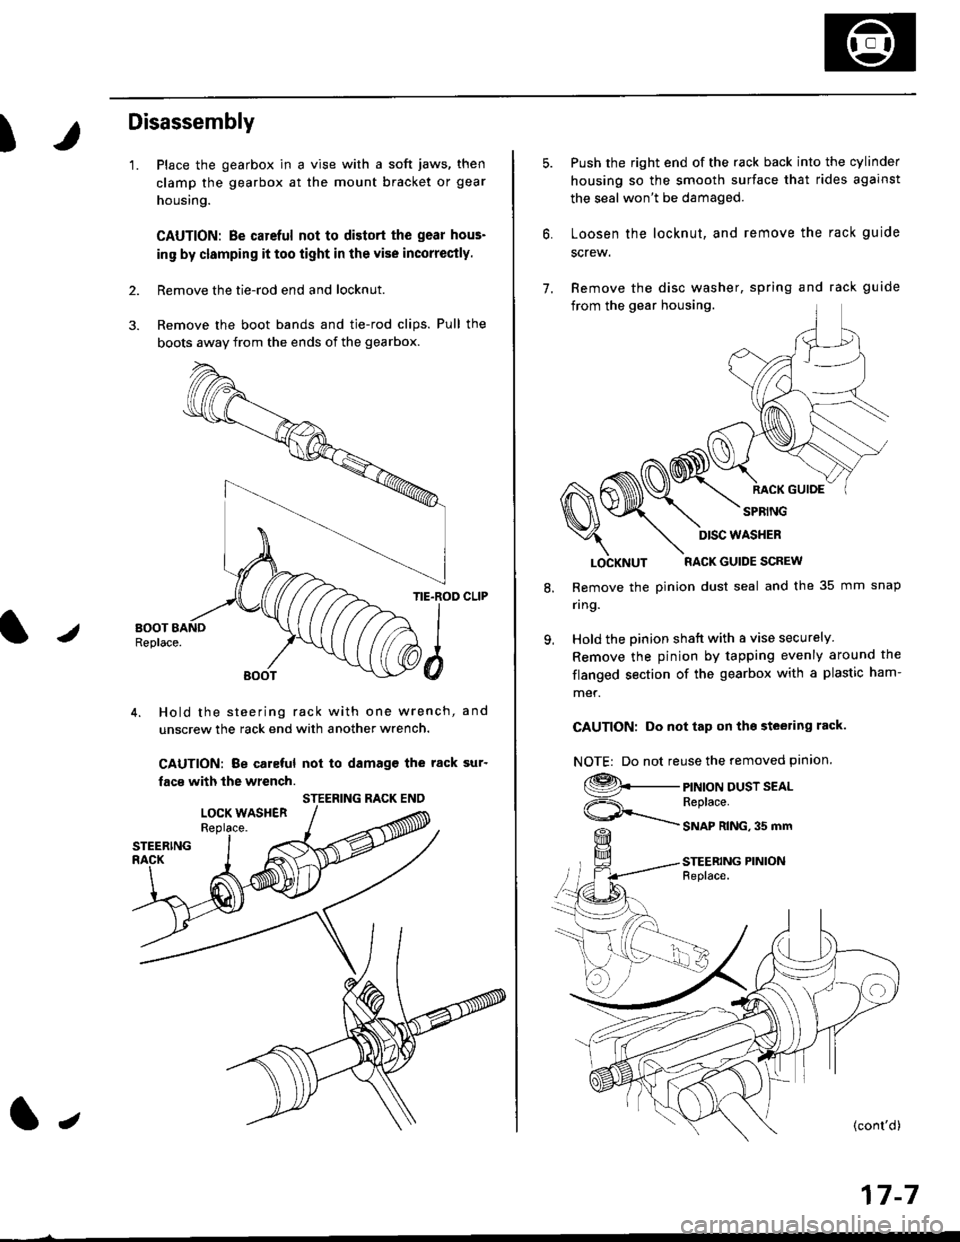 HONDA CIVIC 1999 6.G Workshop Manual )
Disassembly
1.
2.
Place the gearbox in a vise with a soft jaws, then
clamp the gearbox at the mount bracket or gear
housing.
CAUTION: Be carcful not to distort the gear hous-
in9 by clamping it too